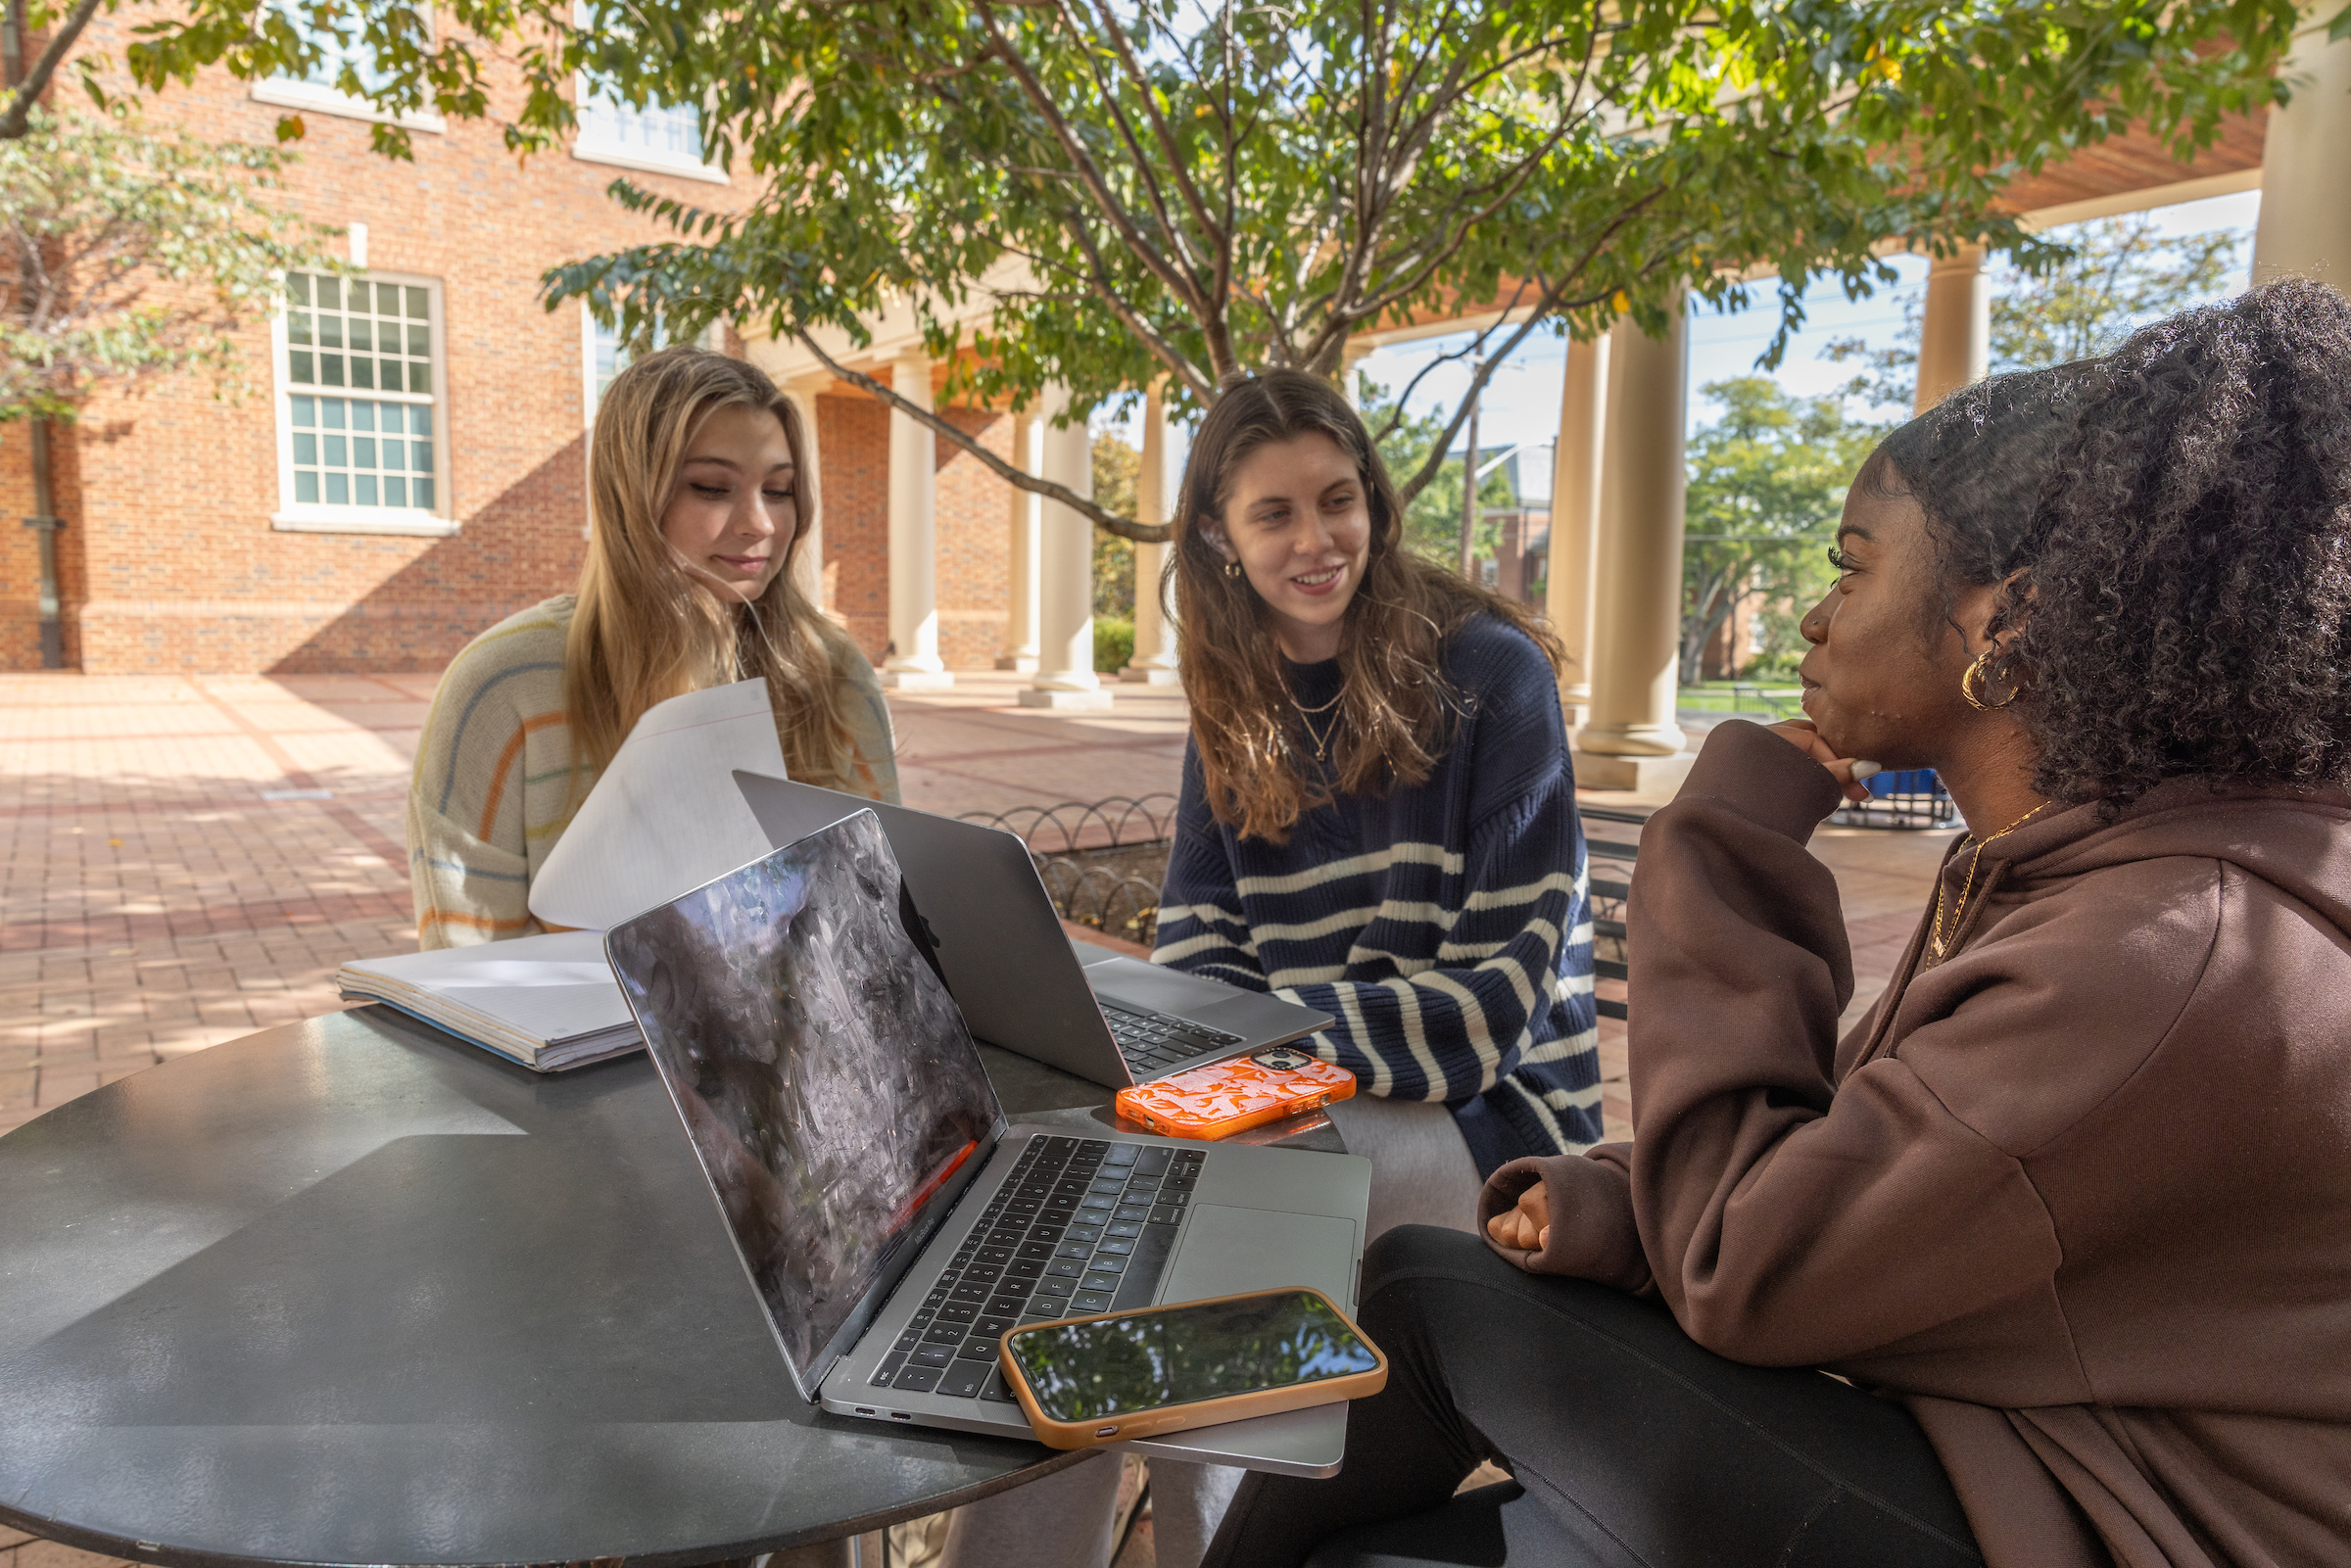 Three students study together at an outdoor table.